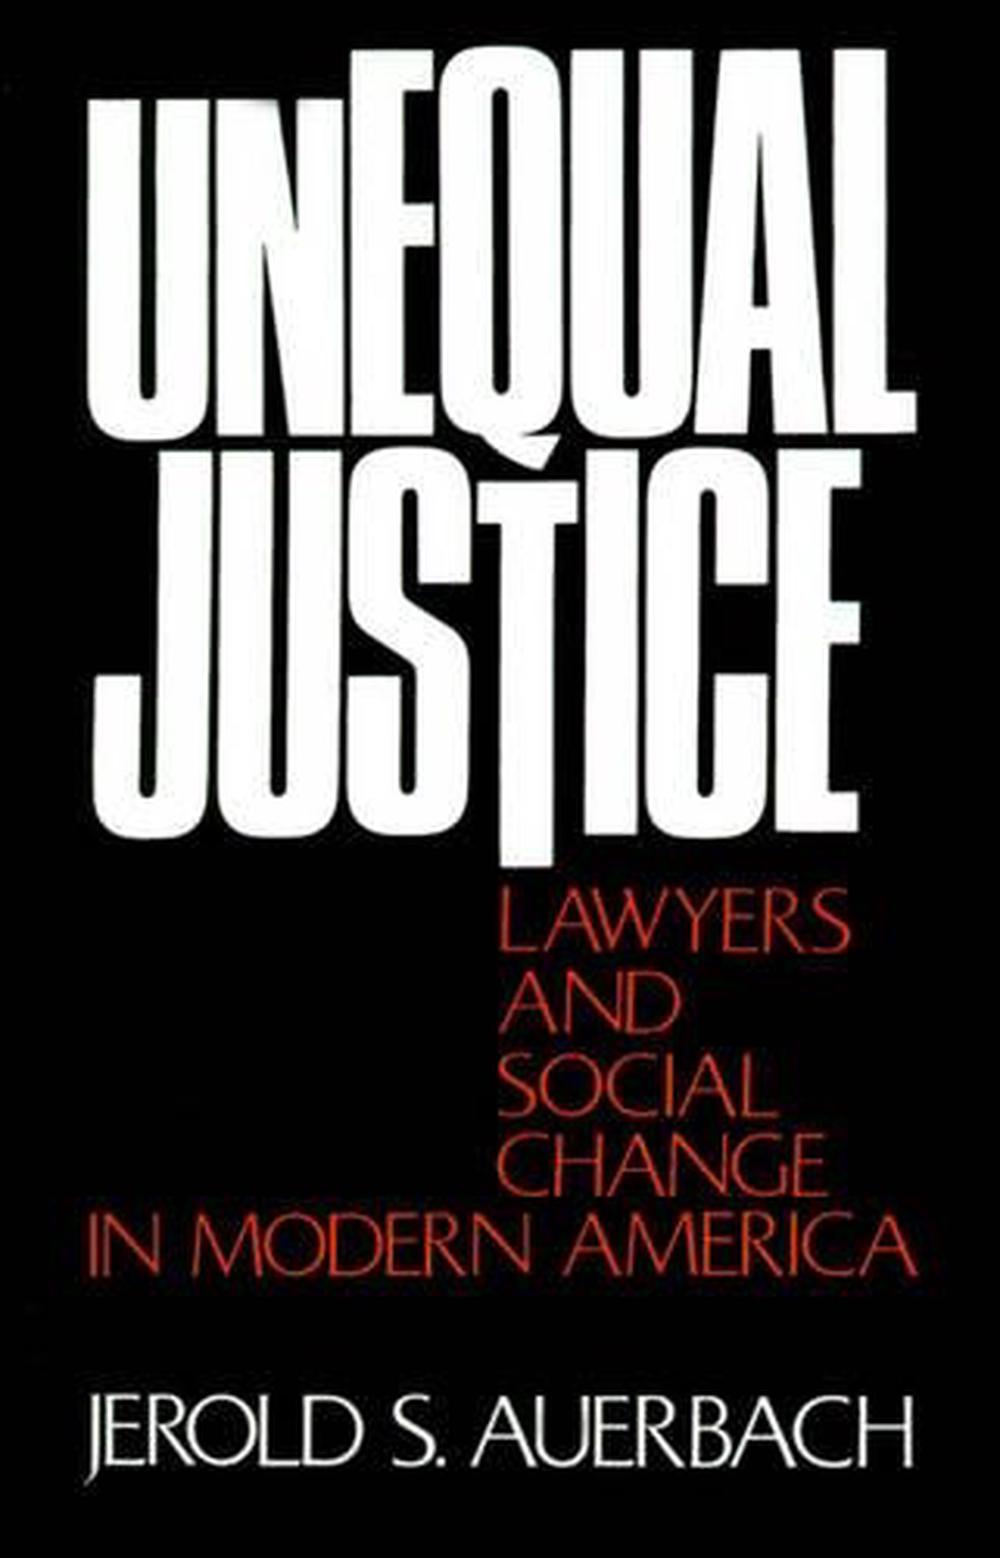 Unequal Justice Lawyers and Social Change in Modern America by Jerold